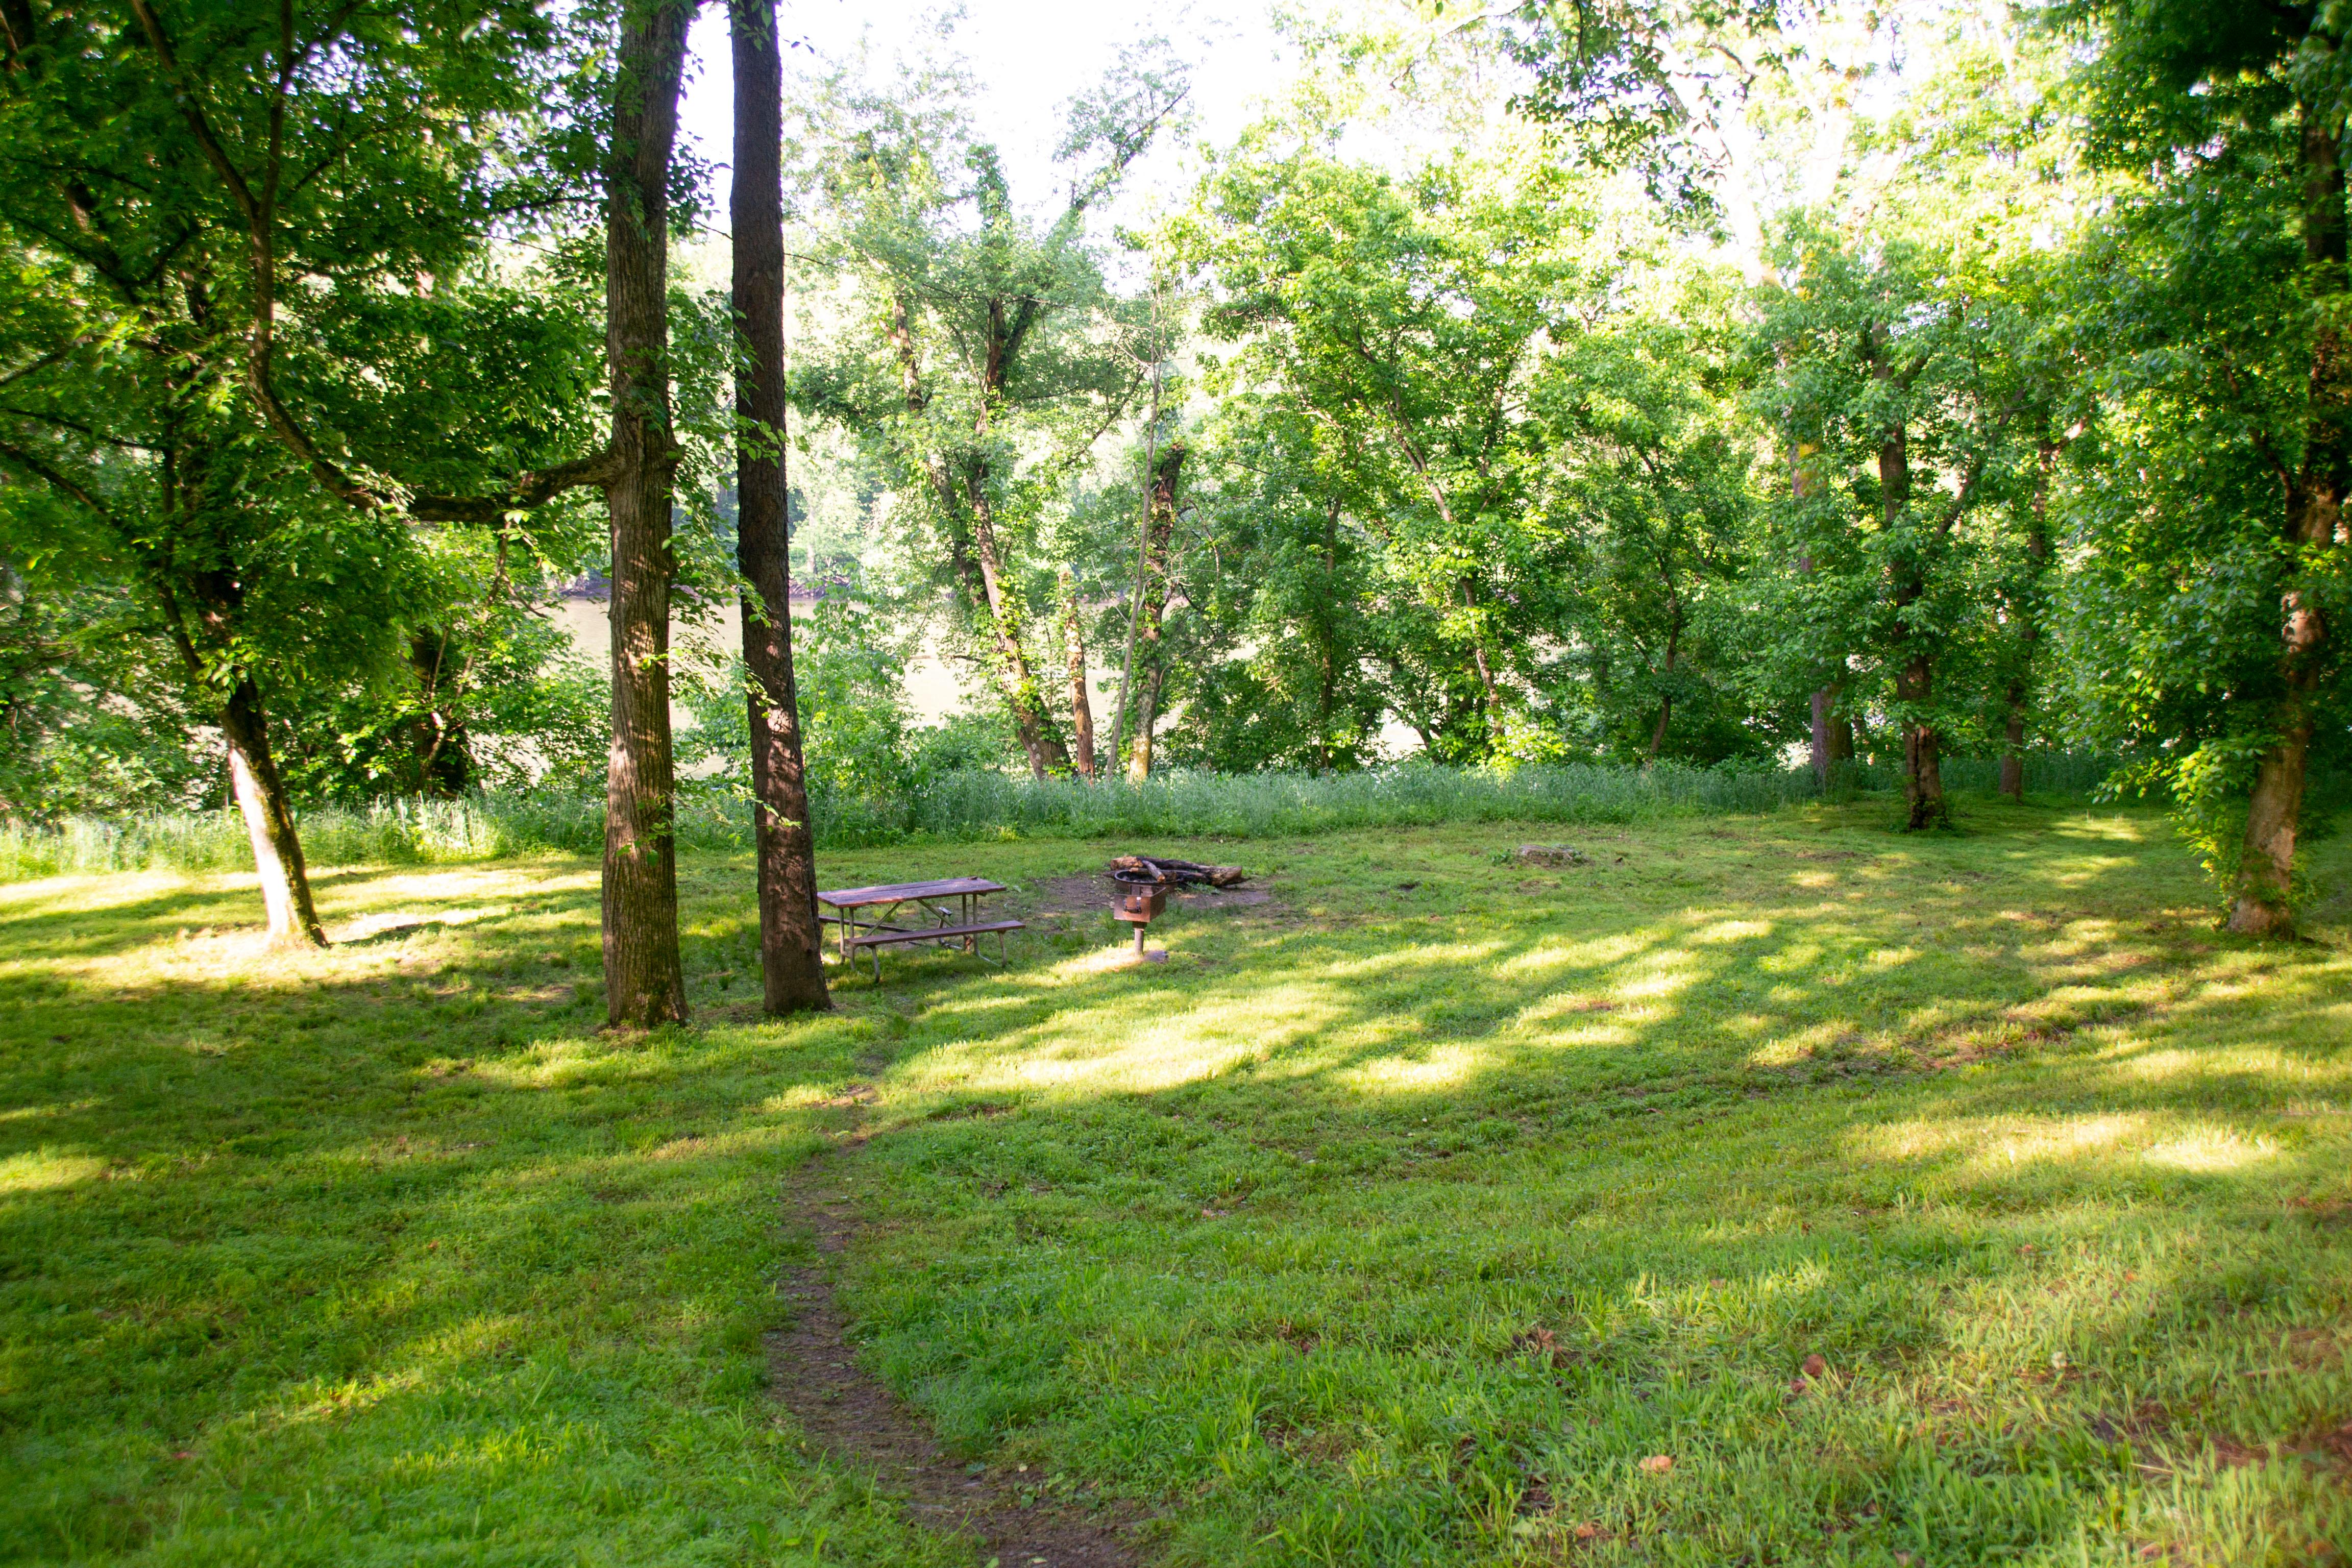 A trail leads to a grassy campsite in the trees.